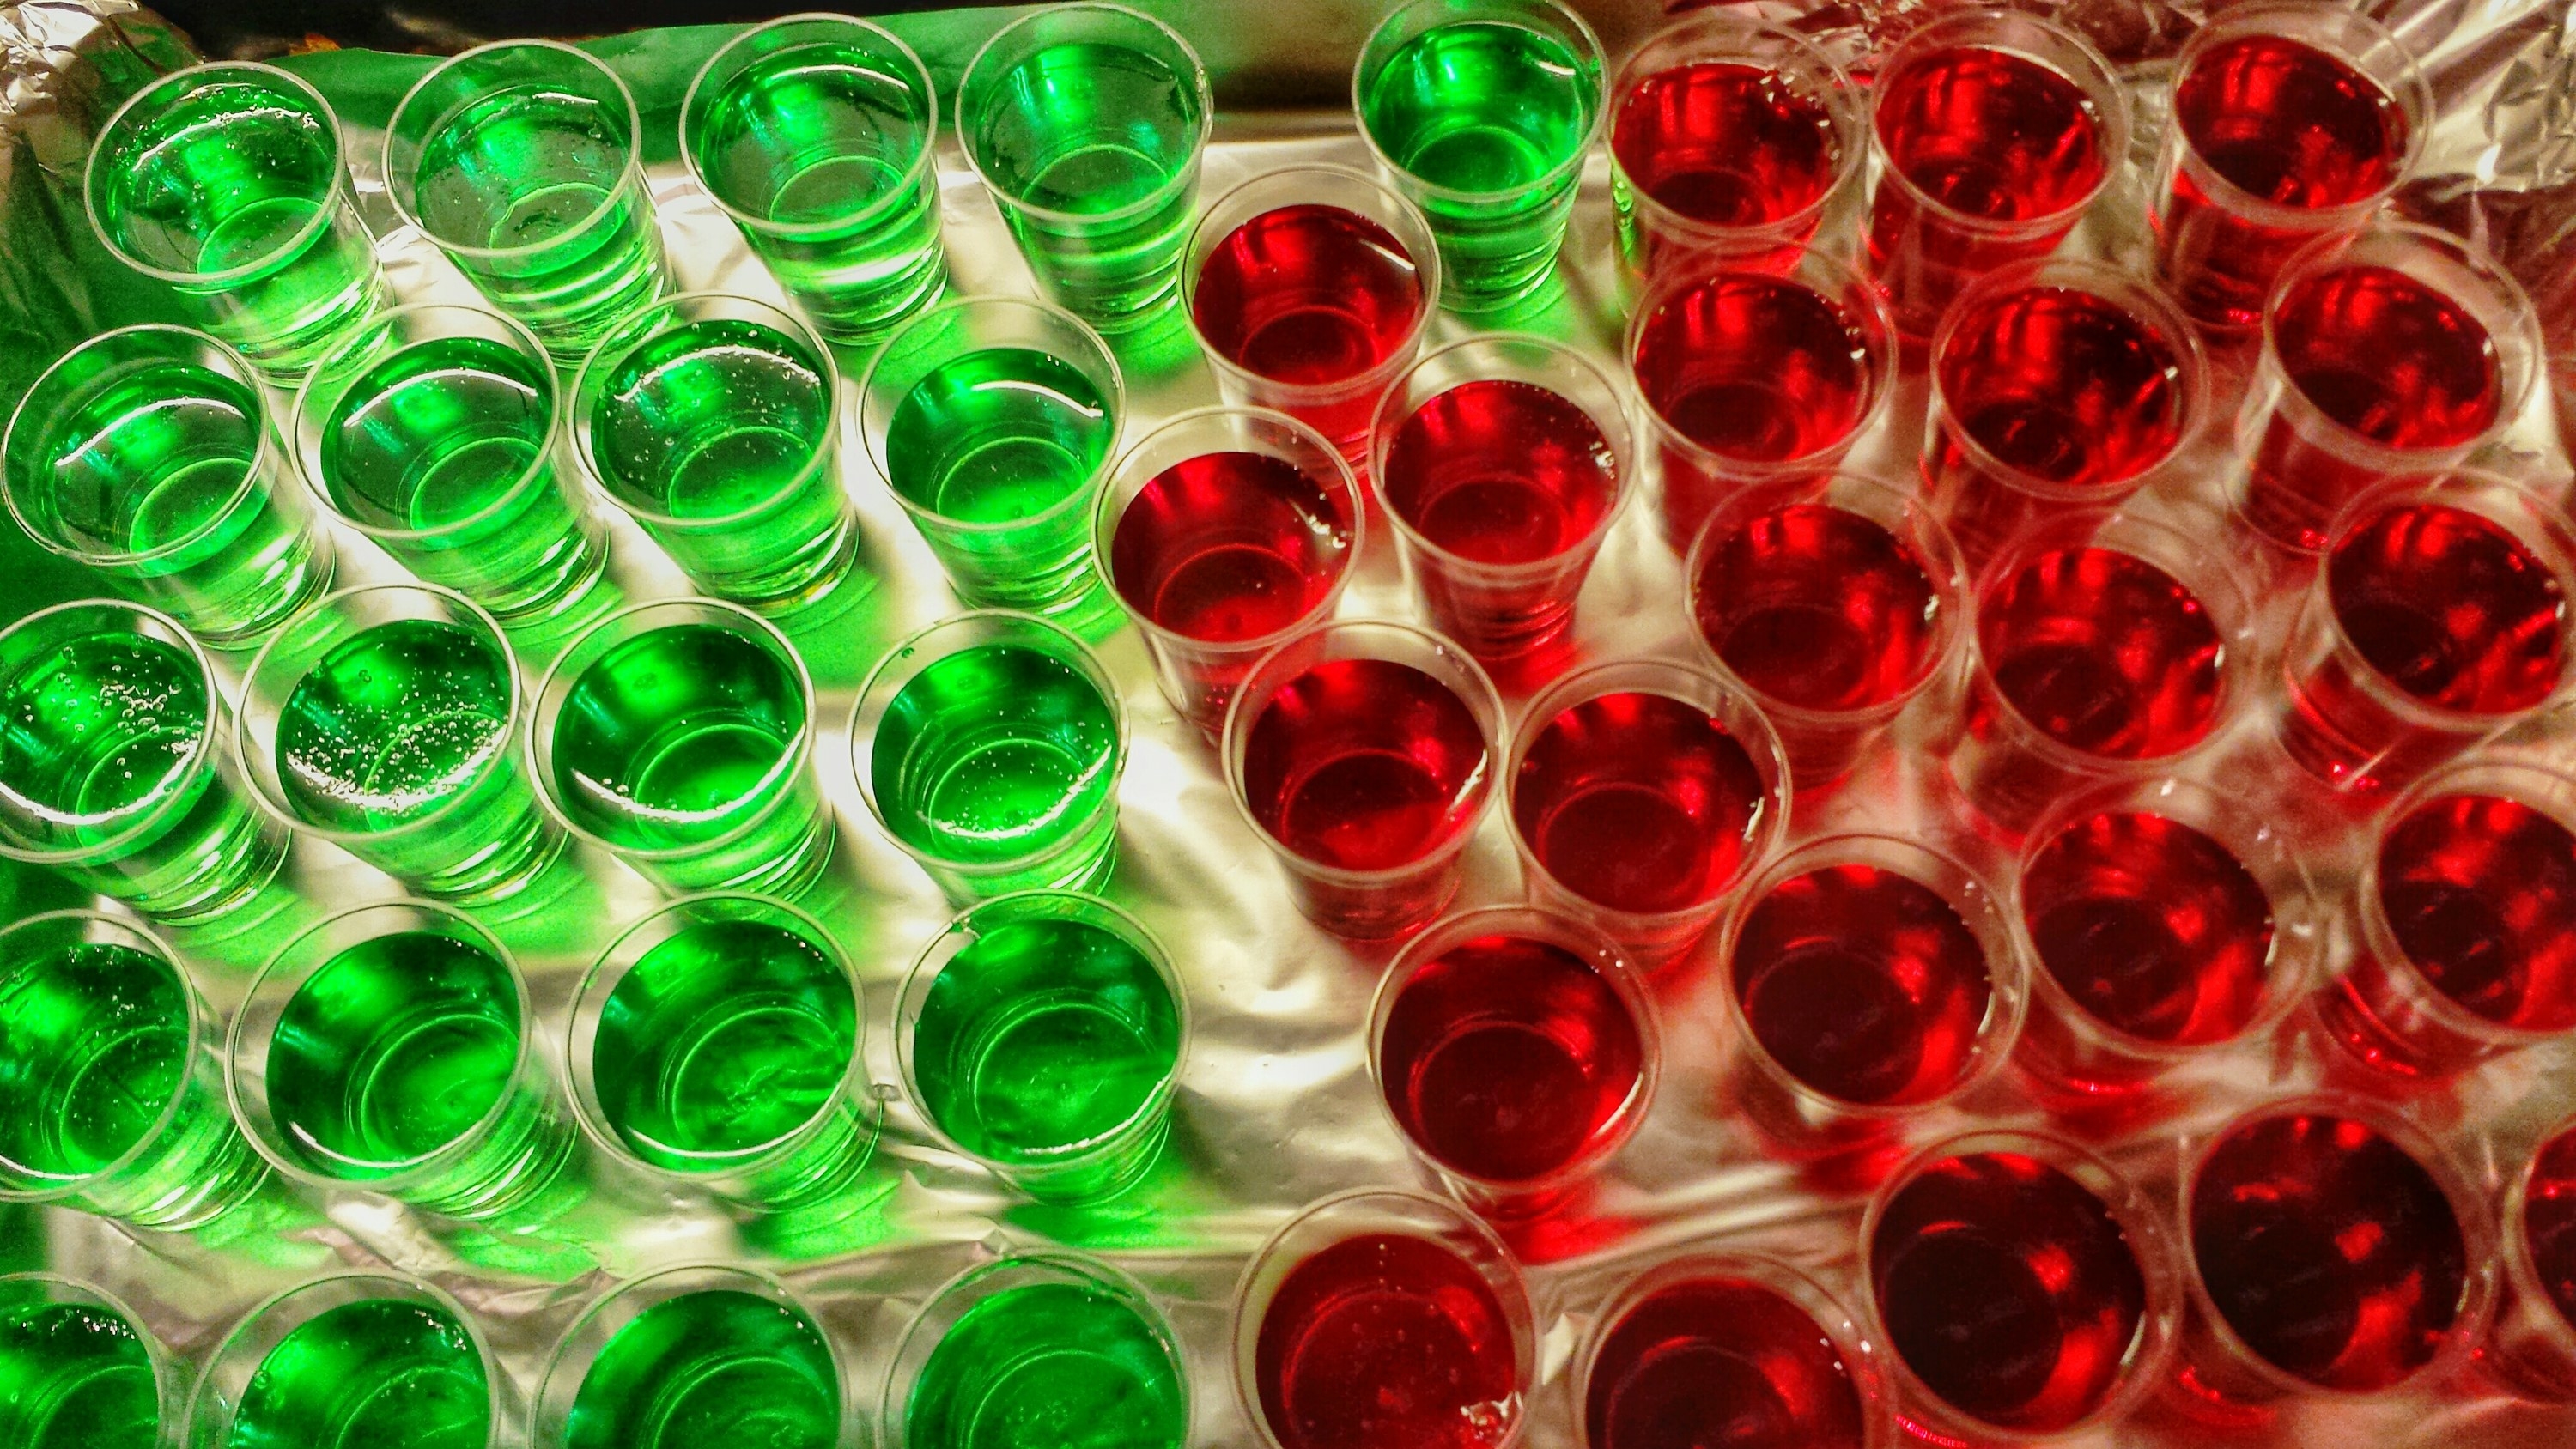 Cups of red and green jell-o